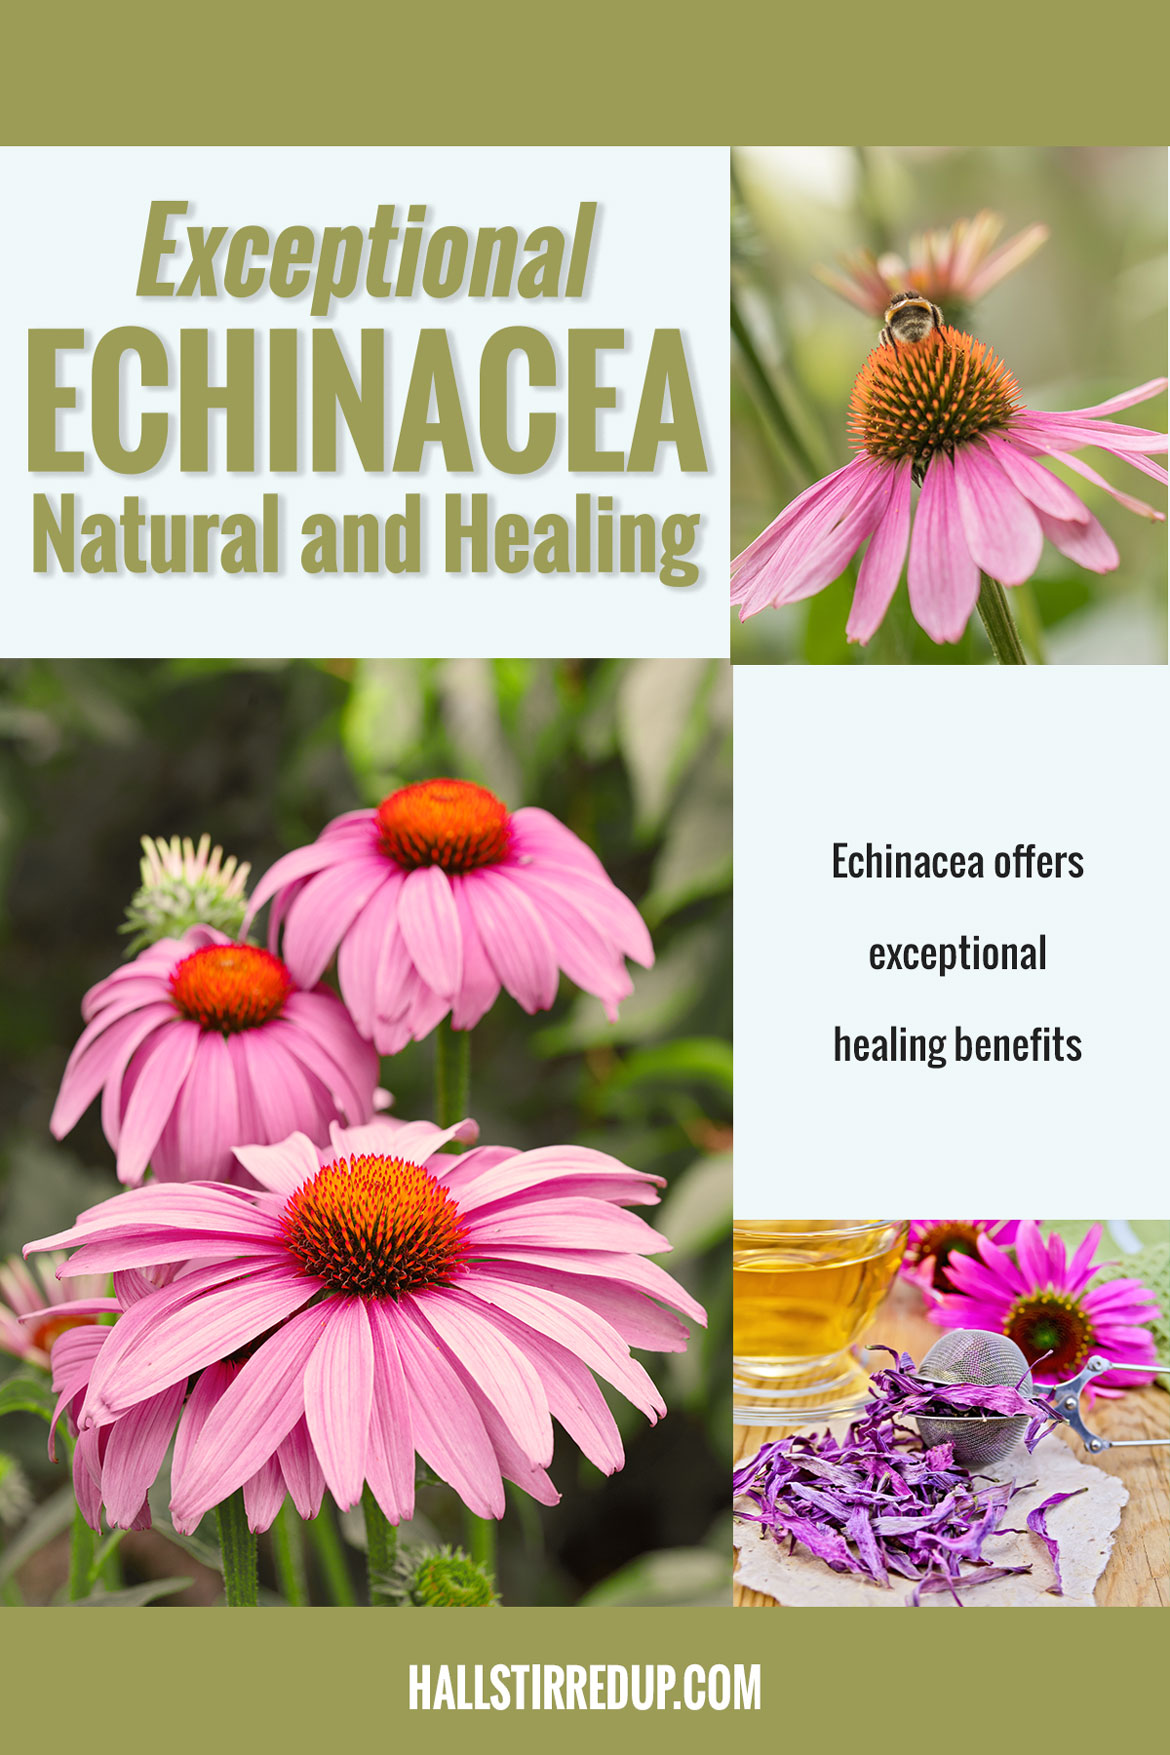 Exceptional Echinacea Natural and Healing